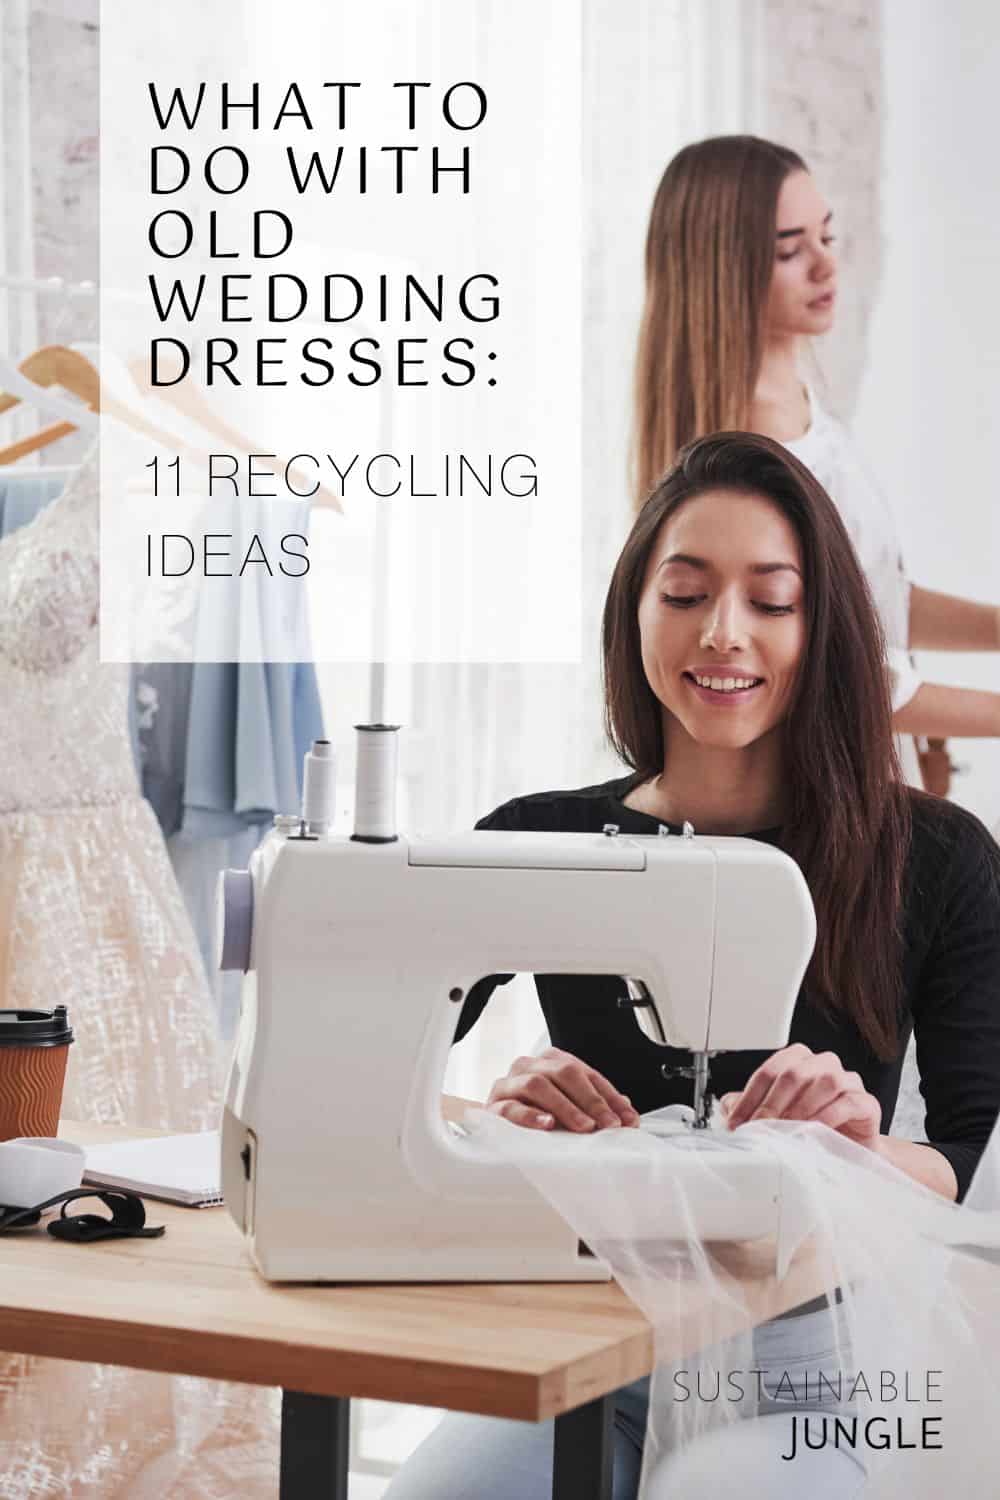 What to Do With Old Wedding Dresses: 11 Recycling Ideas To Take It From Sentimental to Sustainable Image by Myron Standret #whattodowithodlweddingdress #whattodowitholdweddingdresses #whattodowithyouroldweddingdress #recycleweddingdress #weddingdressrecycling #weddingdressrecycleideas #sustainablejungle